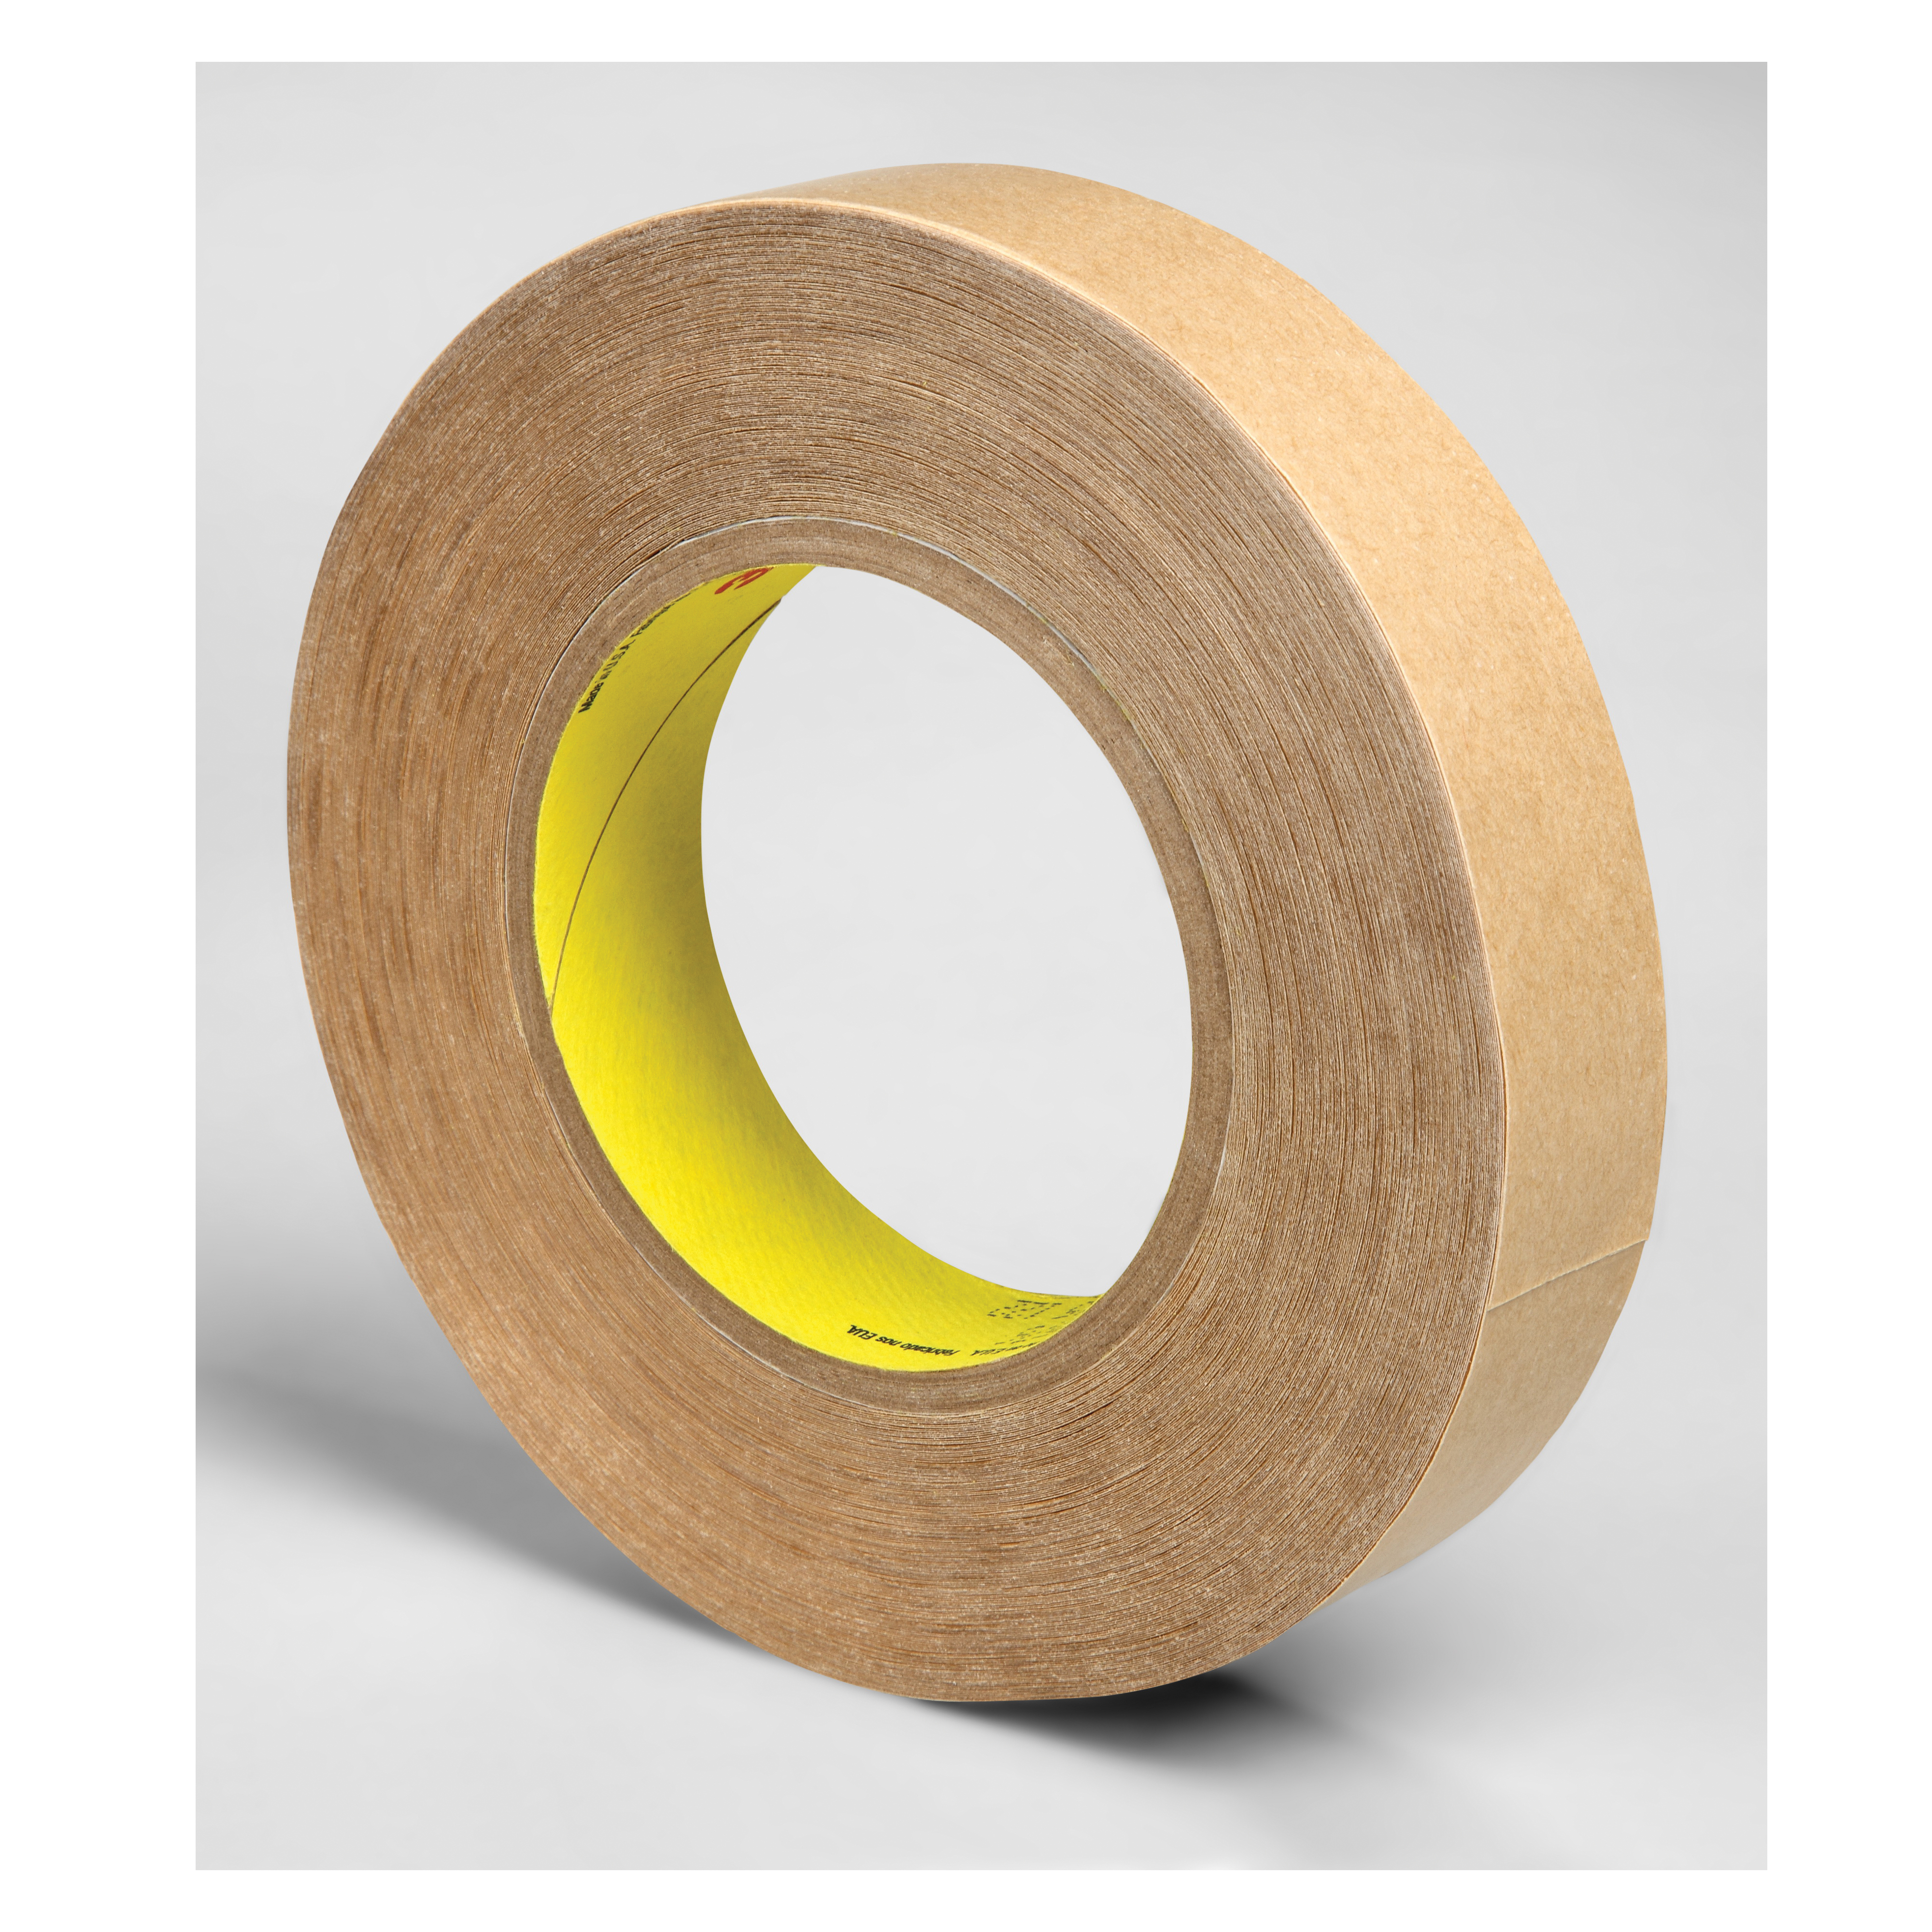 3M™ 021200-87287 Double Coated Tape, 60 yd L x 1/2 in W, 4 mil THK, 400HT Acrylic Adhesive, Polypropylene Backing, Clear